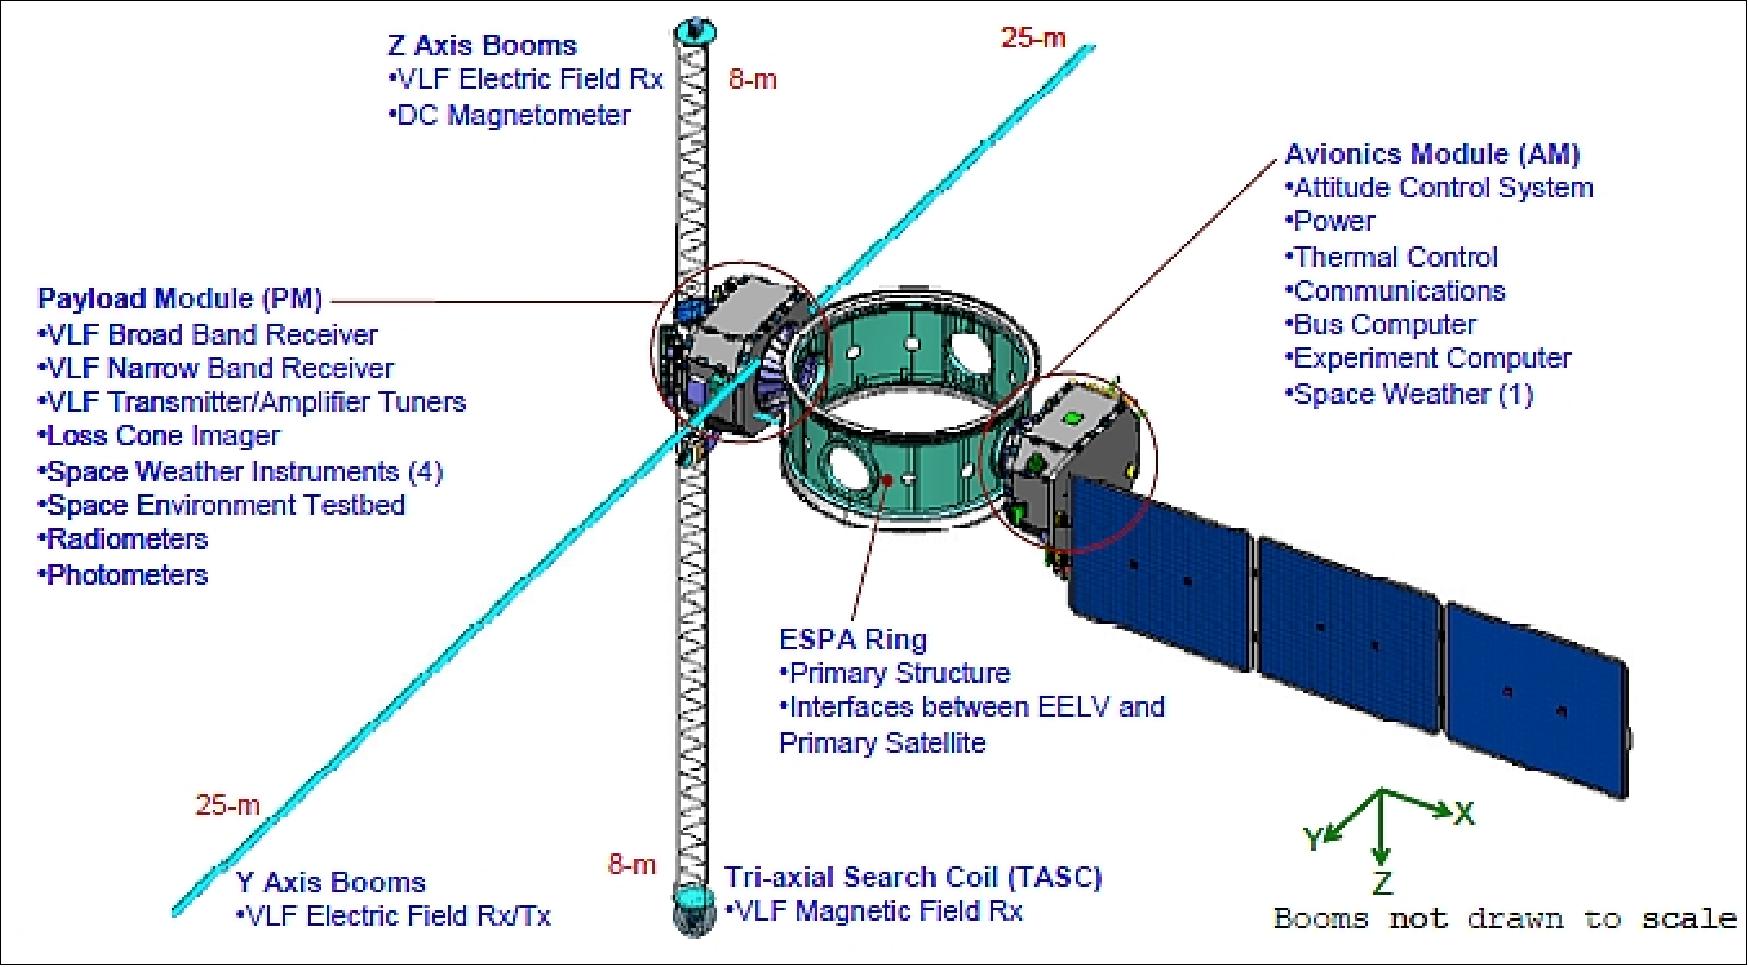 Figure 3: Alternate view of the DSX spacecraft and its components (image credit: SNC)